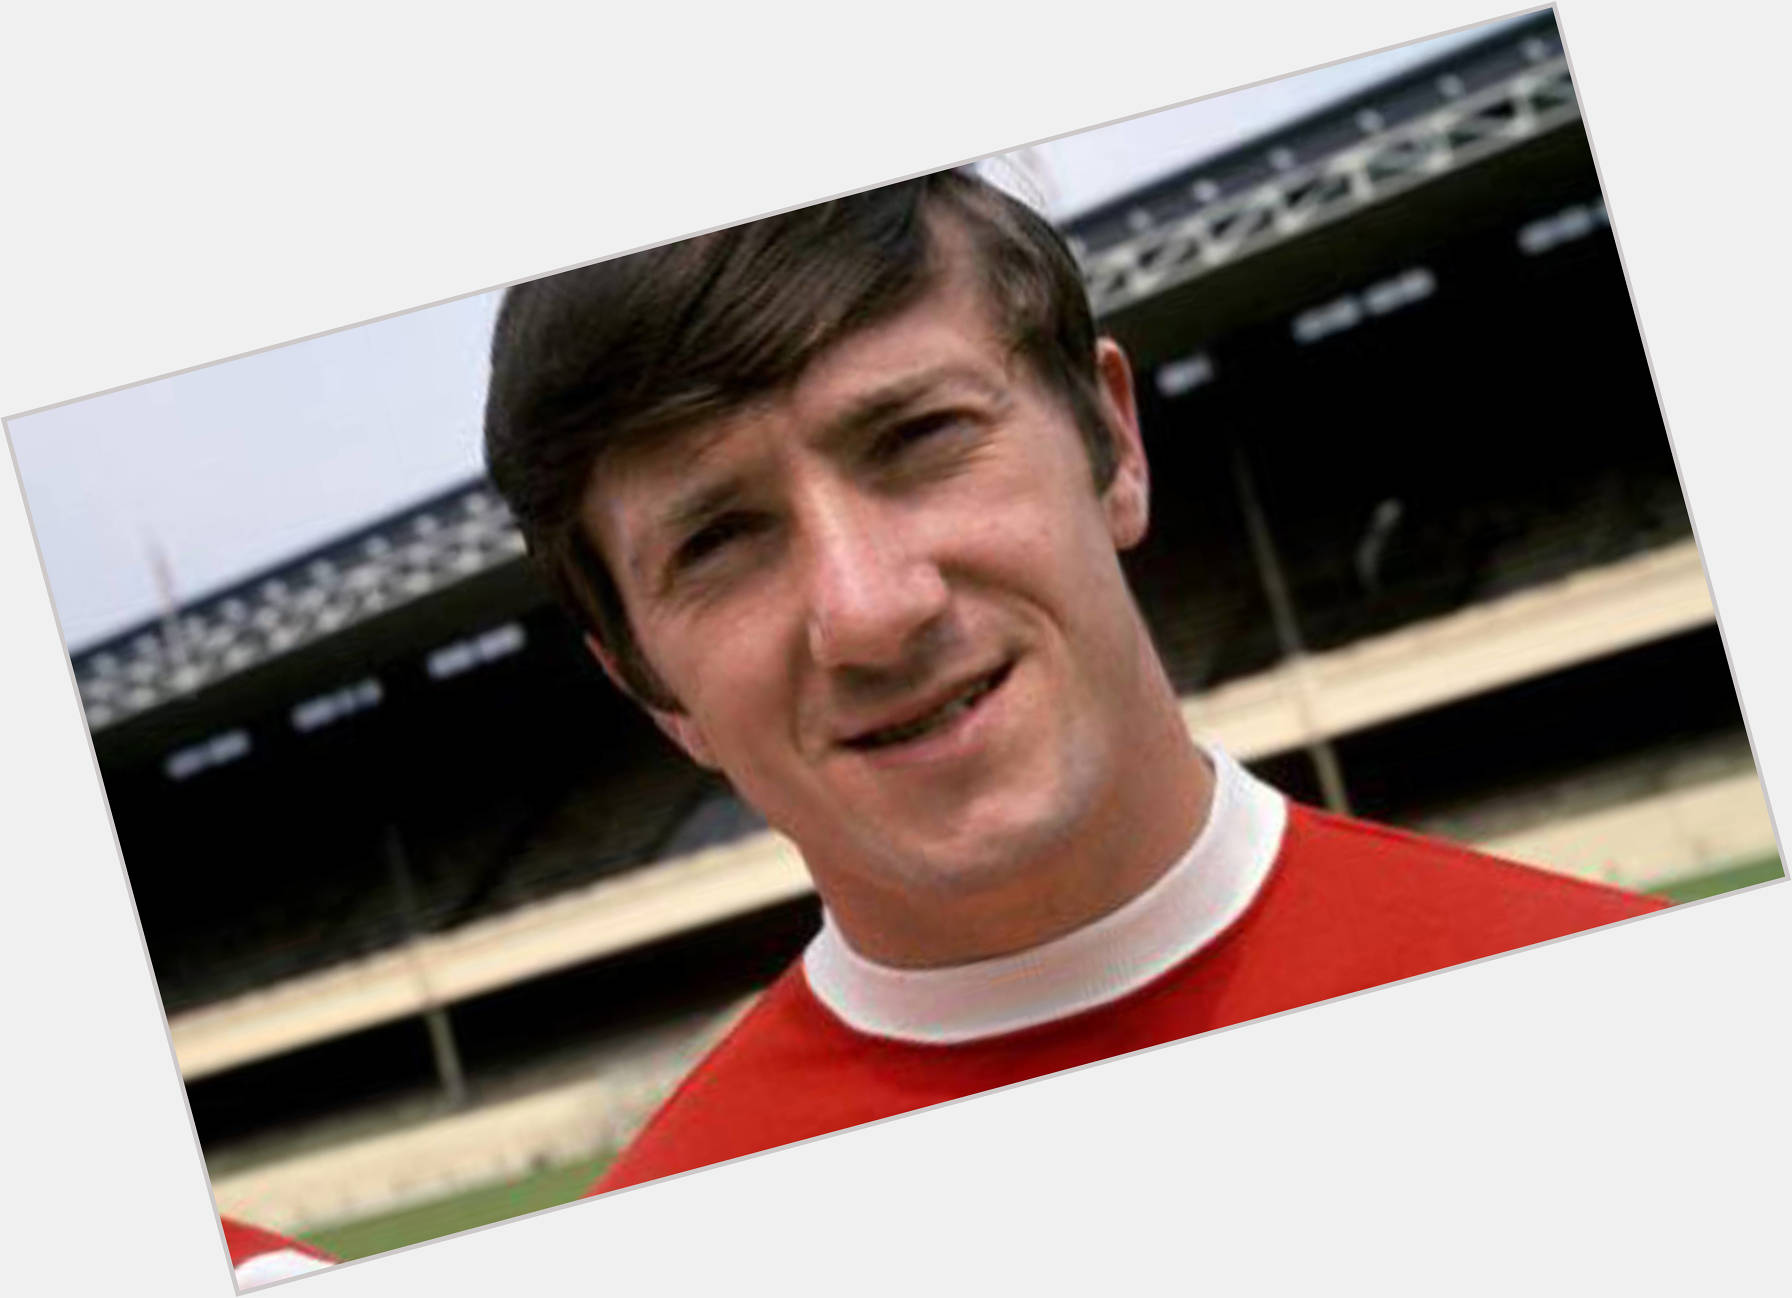 <a href="/hot-men/george-armstrong/is-he-custer-william-b-l">George Armstrong</a>  